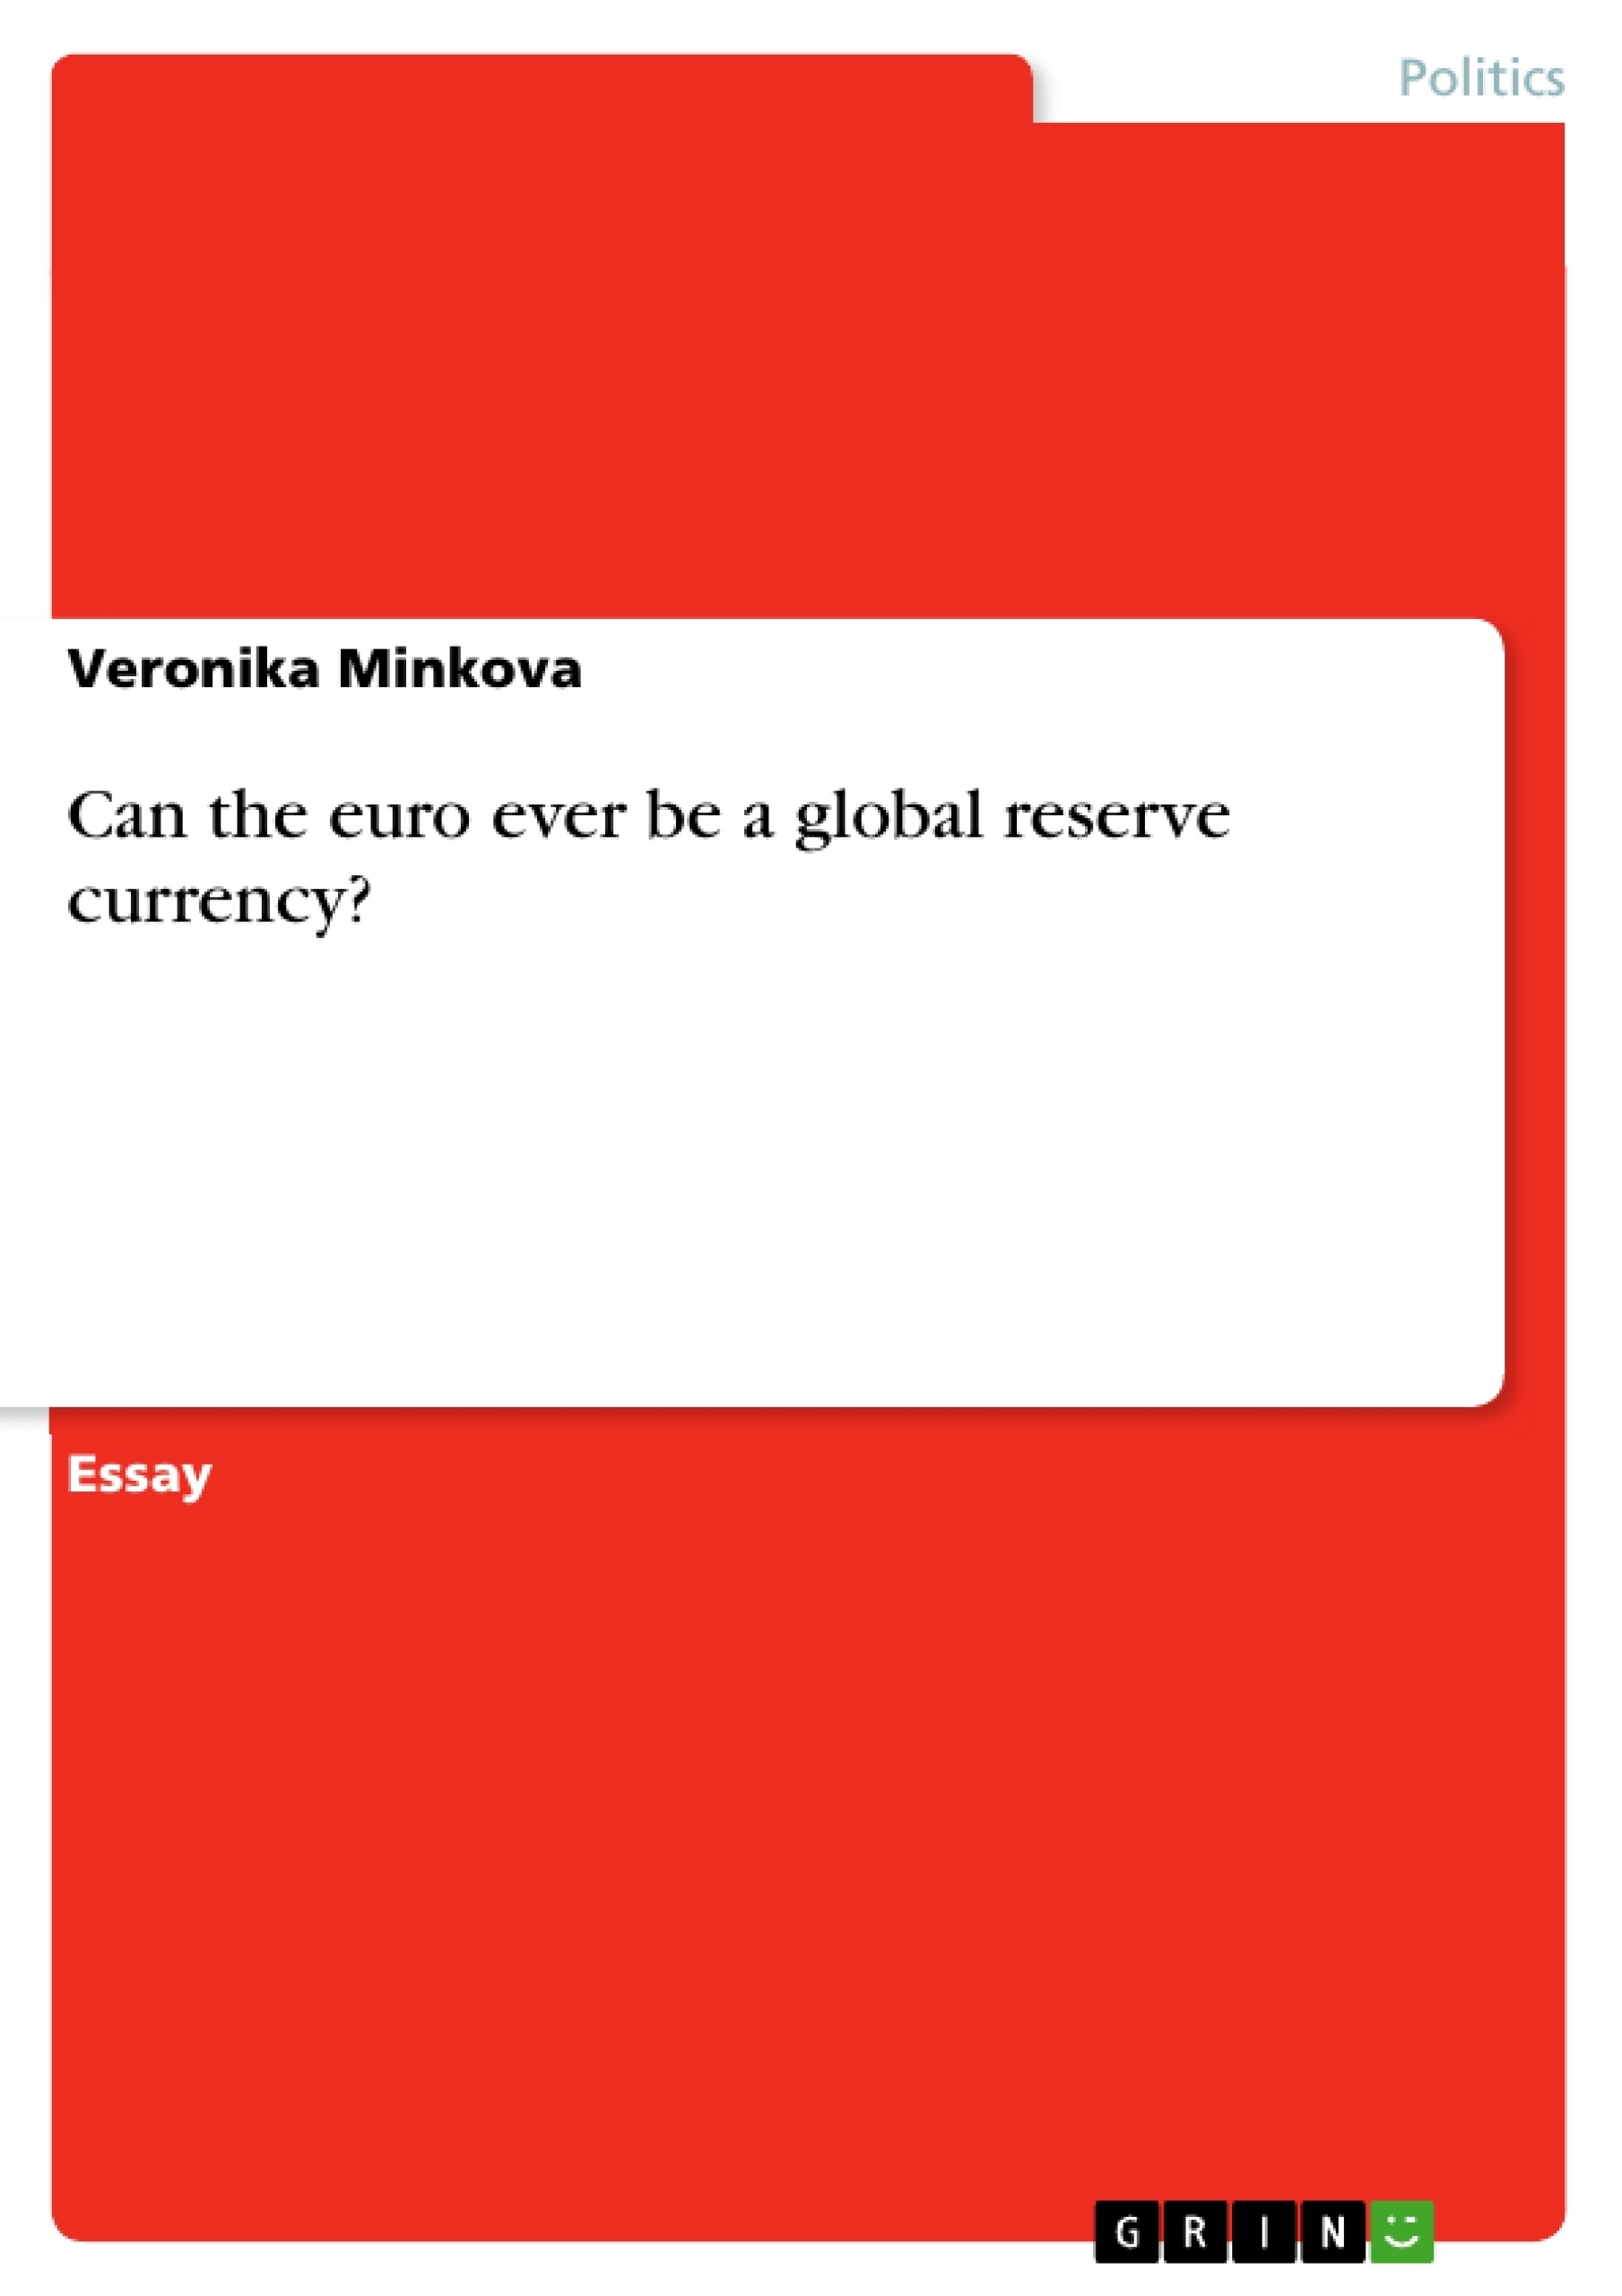 Título: Can the euro ever be a global reserve currency?